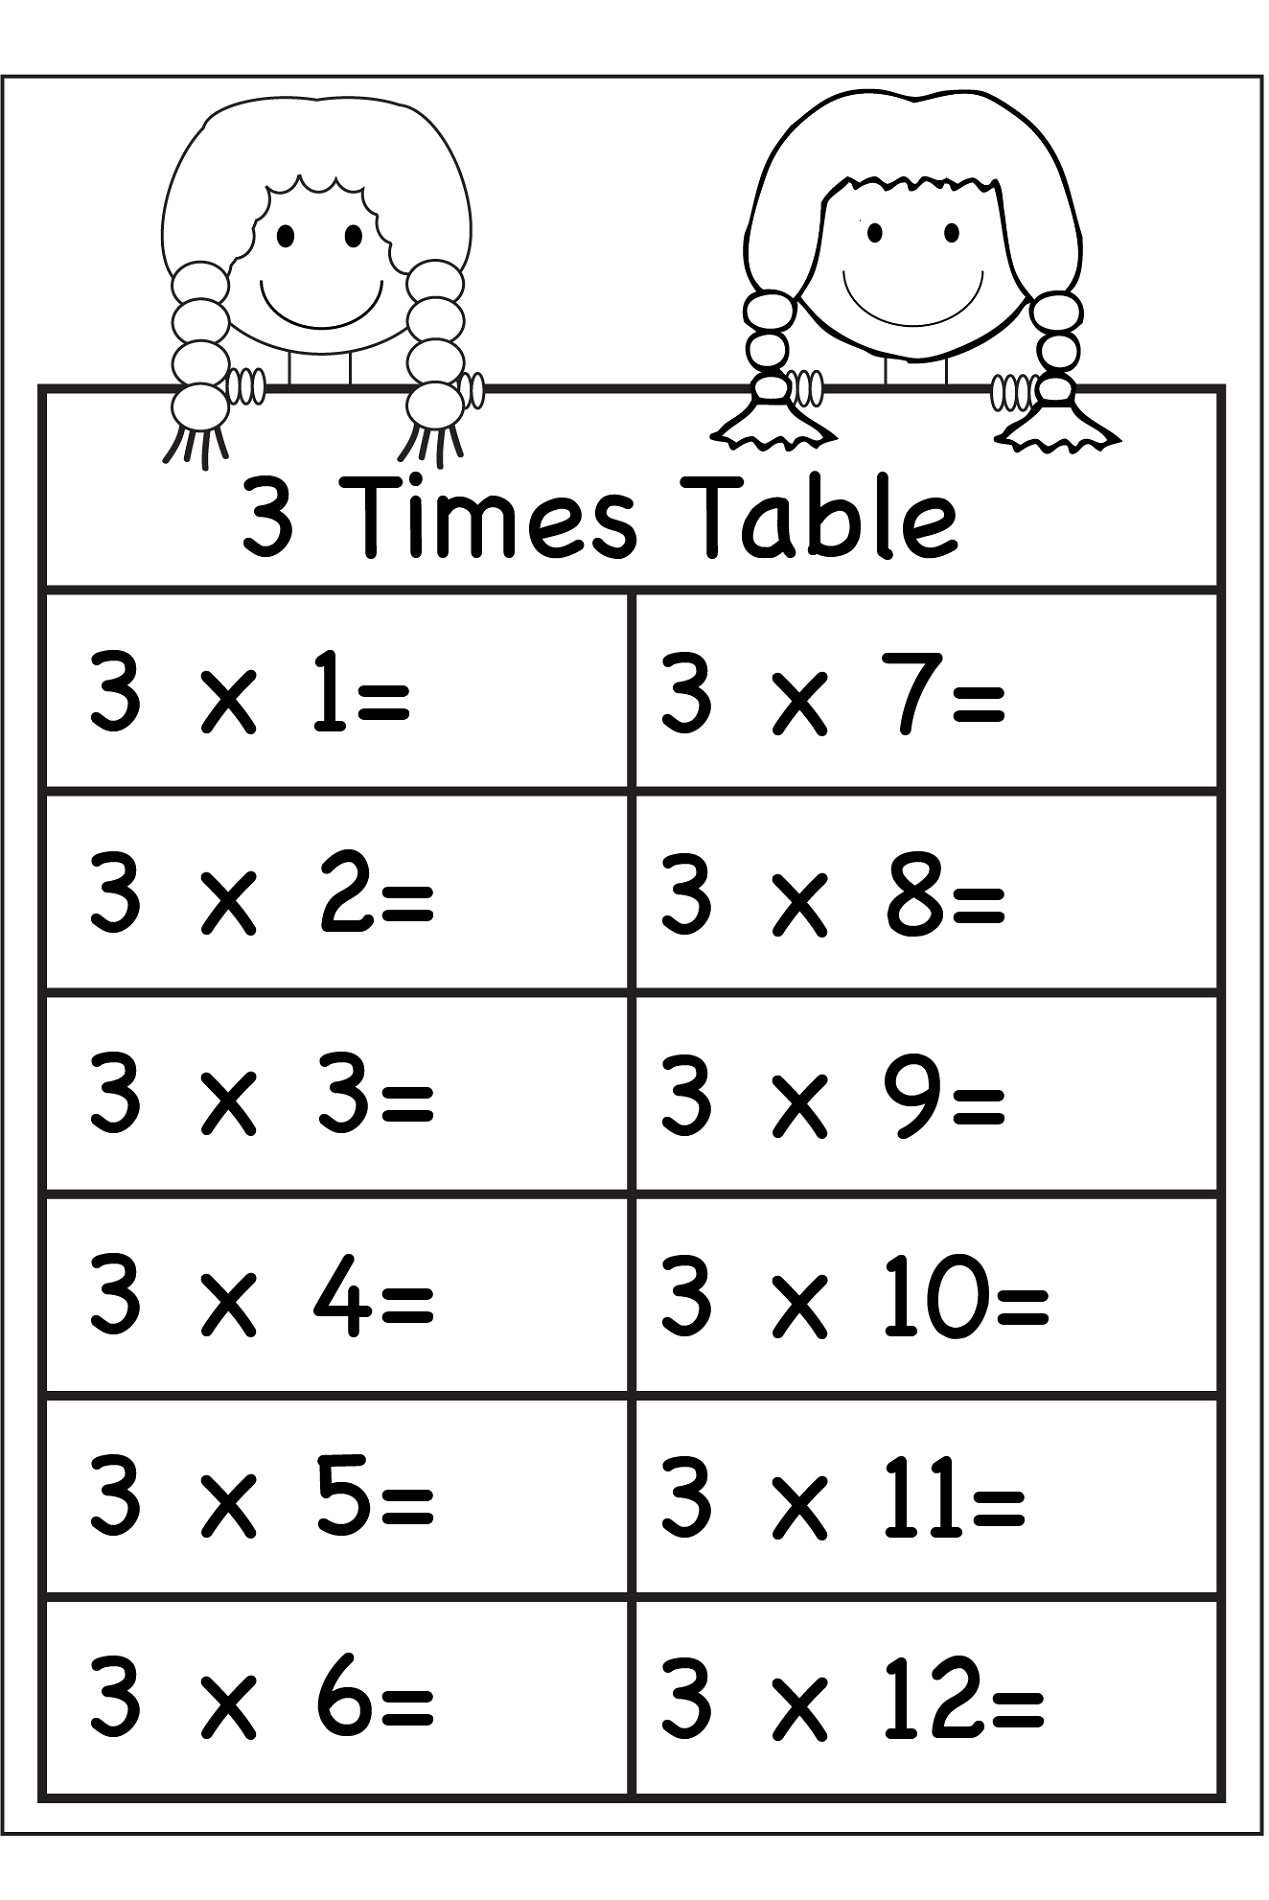 3 times tables worksheets for learning